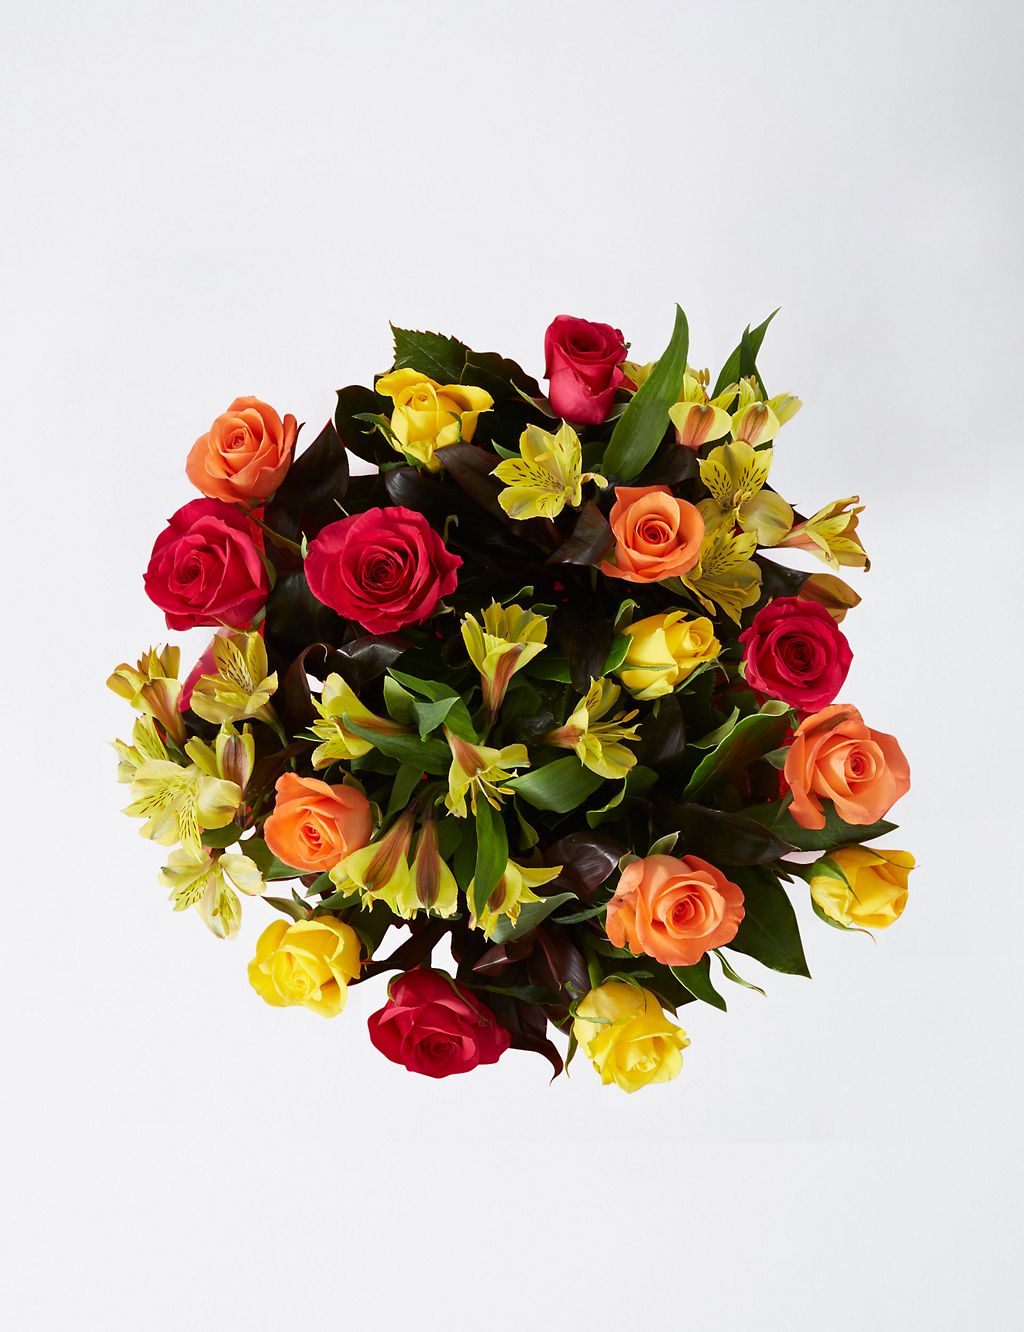 Rose & Alstroemeria Bouquet - Last Chance to Buy 1 of 6